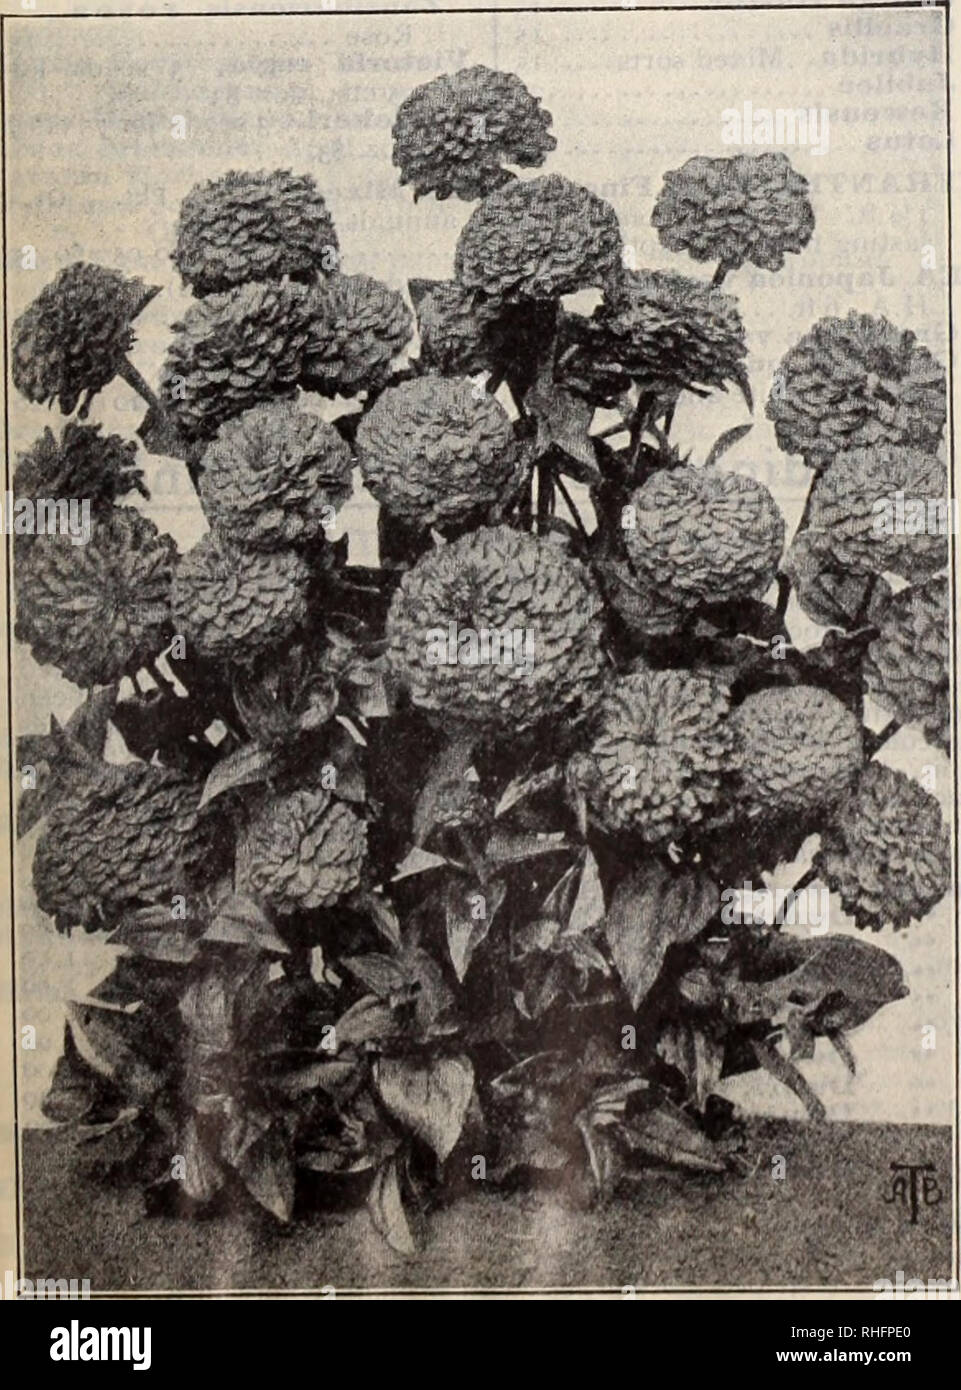 . Boddington's quality bulbs, seeds and plants / Arthur T. Boddington.. Nursery Catalogue. BODDINGTON'S ^A^^XtC^A/ SEED&quot;s 57 Trachelium coeruleum G.S.) A free-growing greenhouse annual of easy culture, having large cloud-like heads of clear pale mauve flowers somewhat resembling Gypsophila. Height, i8 in. Pkt. 25 cts., 5 pkts. for jSi. TRITOMA (Red-Hot-Poker; Flame Flower). HP. 4ft. Pkt New sorts, mixed. Summer $0 25 TROLLIUS (Globe Flower). H.P. 2 ft. Summer. Caucasicus (Golden Globe). Yellow â 10 Japonicus fl.pl. Double yellow VJoz., S1.25.. 25 New Hybrids. Mi.xed ' 25 TOBACCO, see Nico Stock Photo